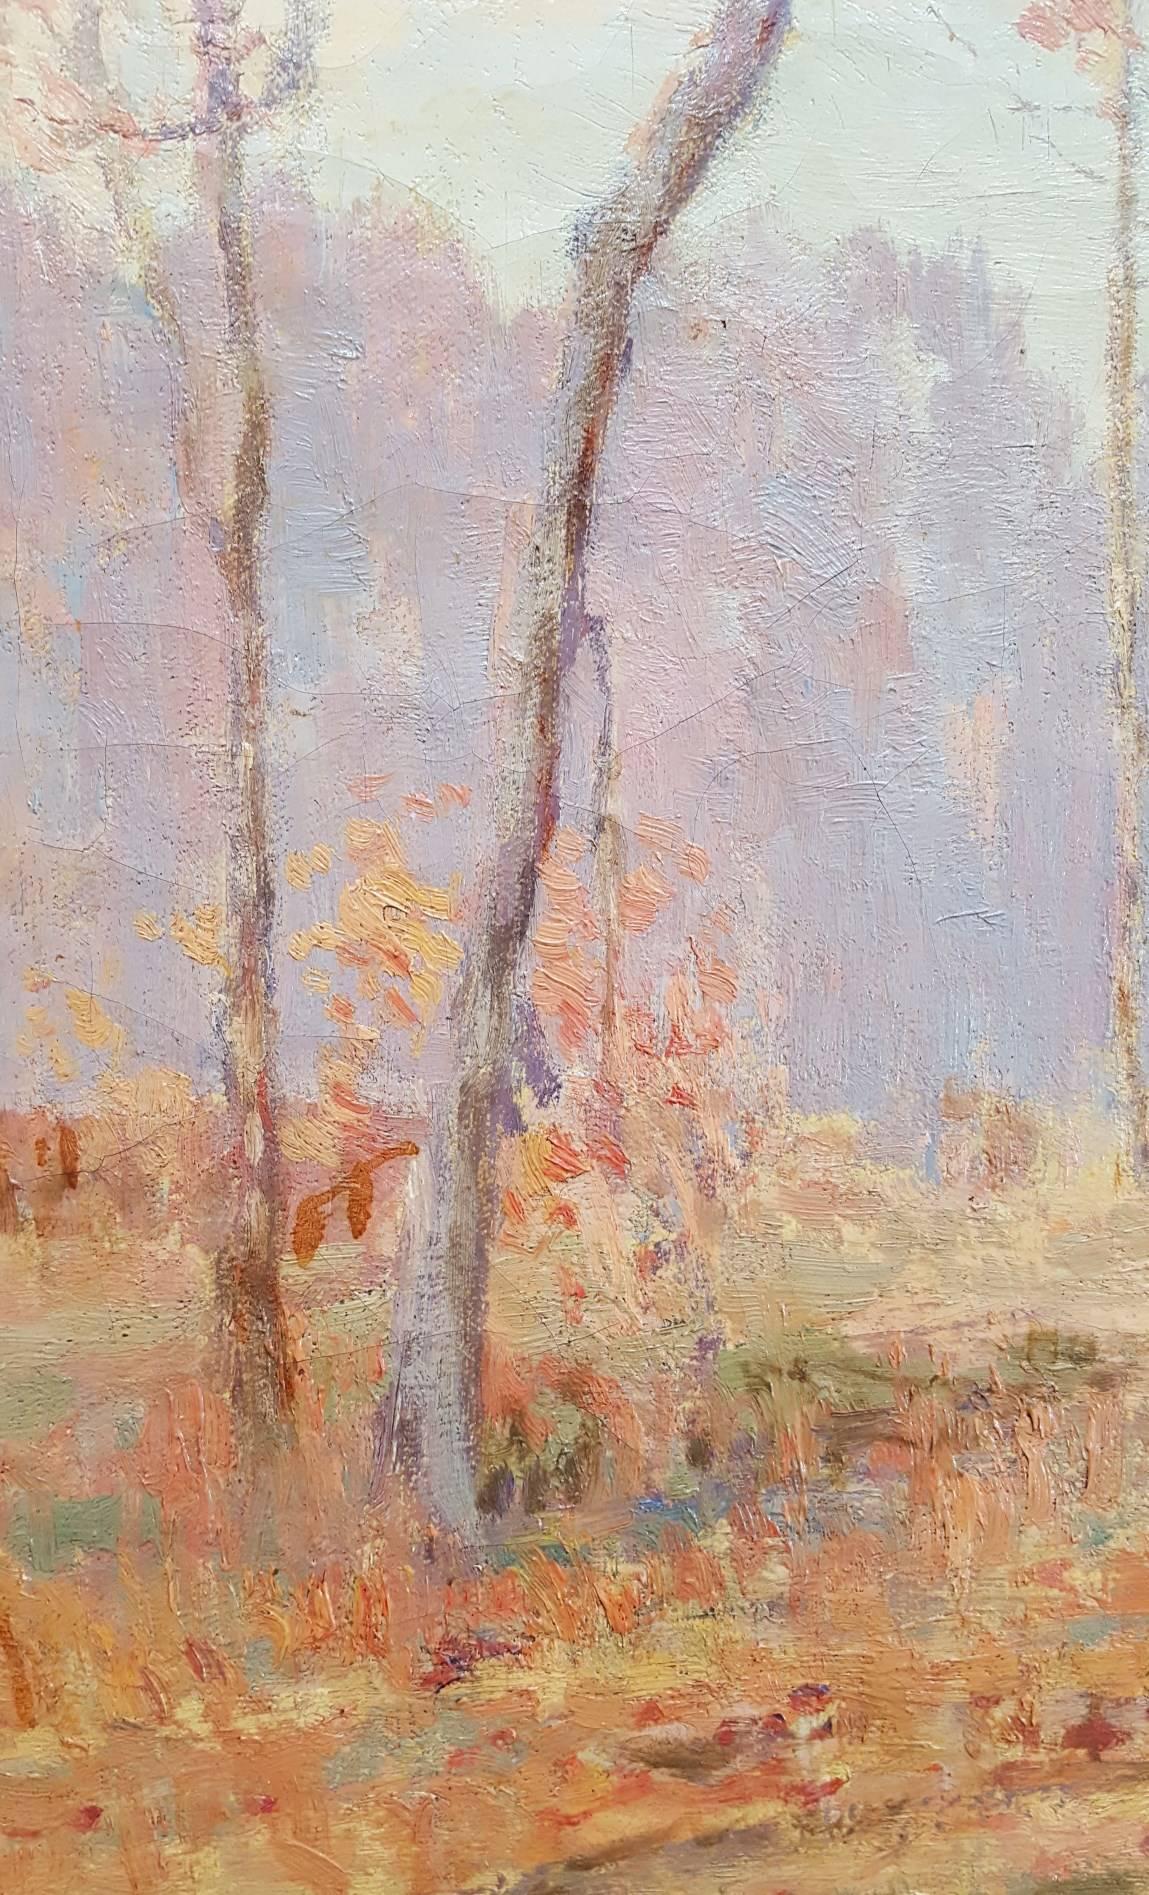 Impressionist Autumn Landscape - American Impressionist Painting by Alfred Jansson